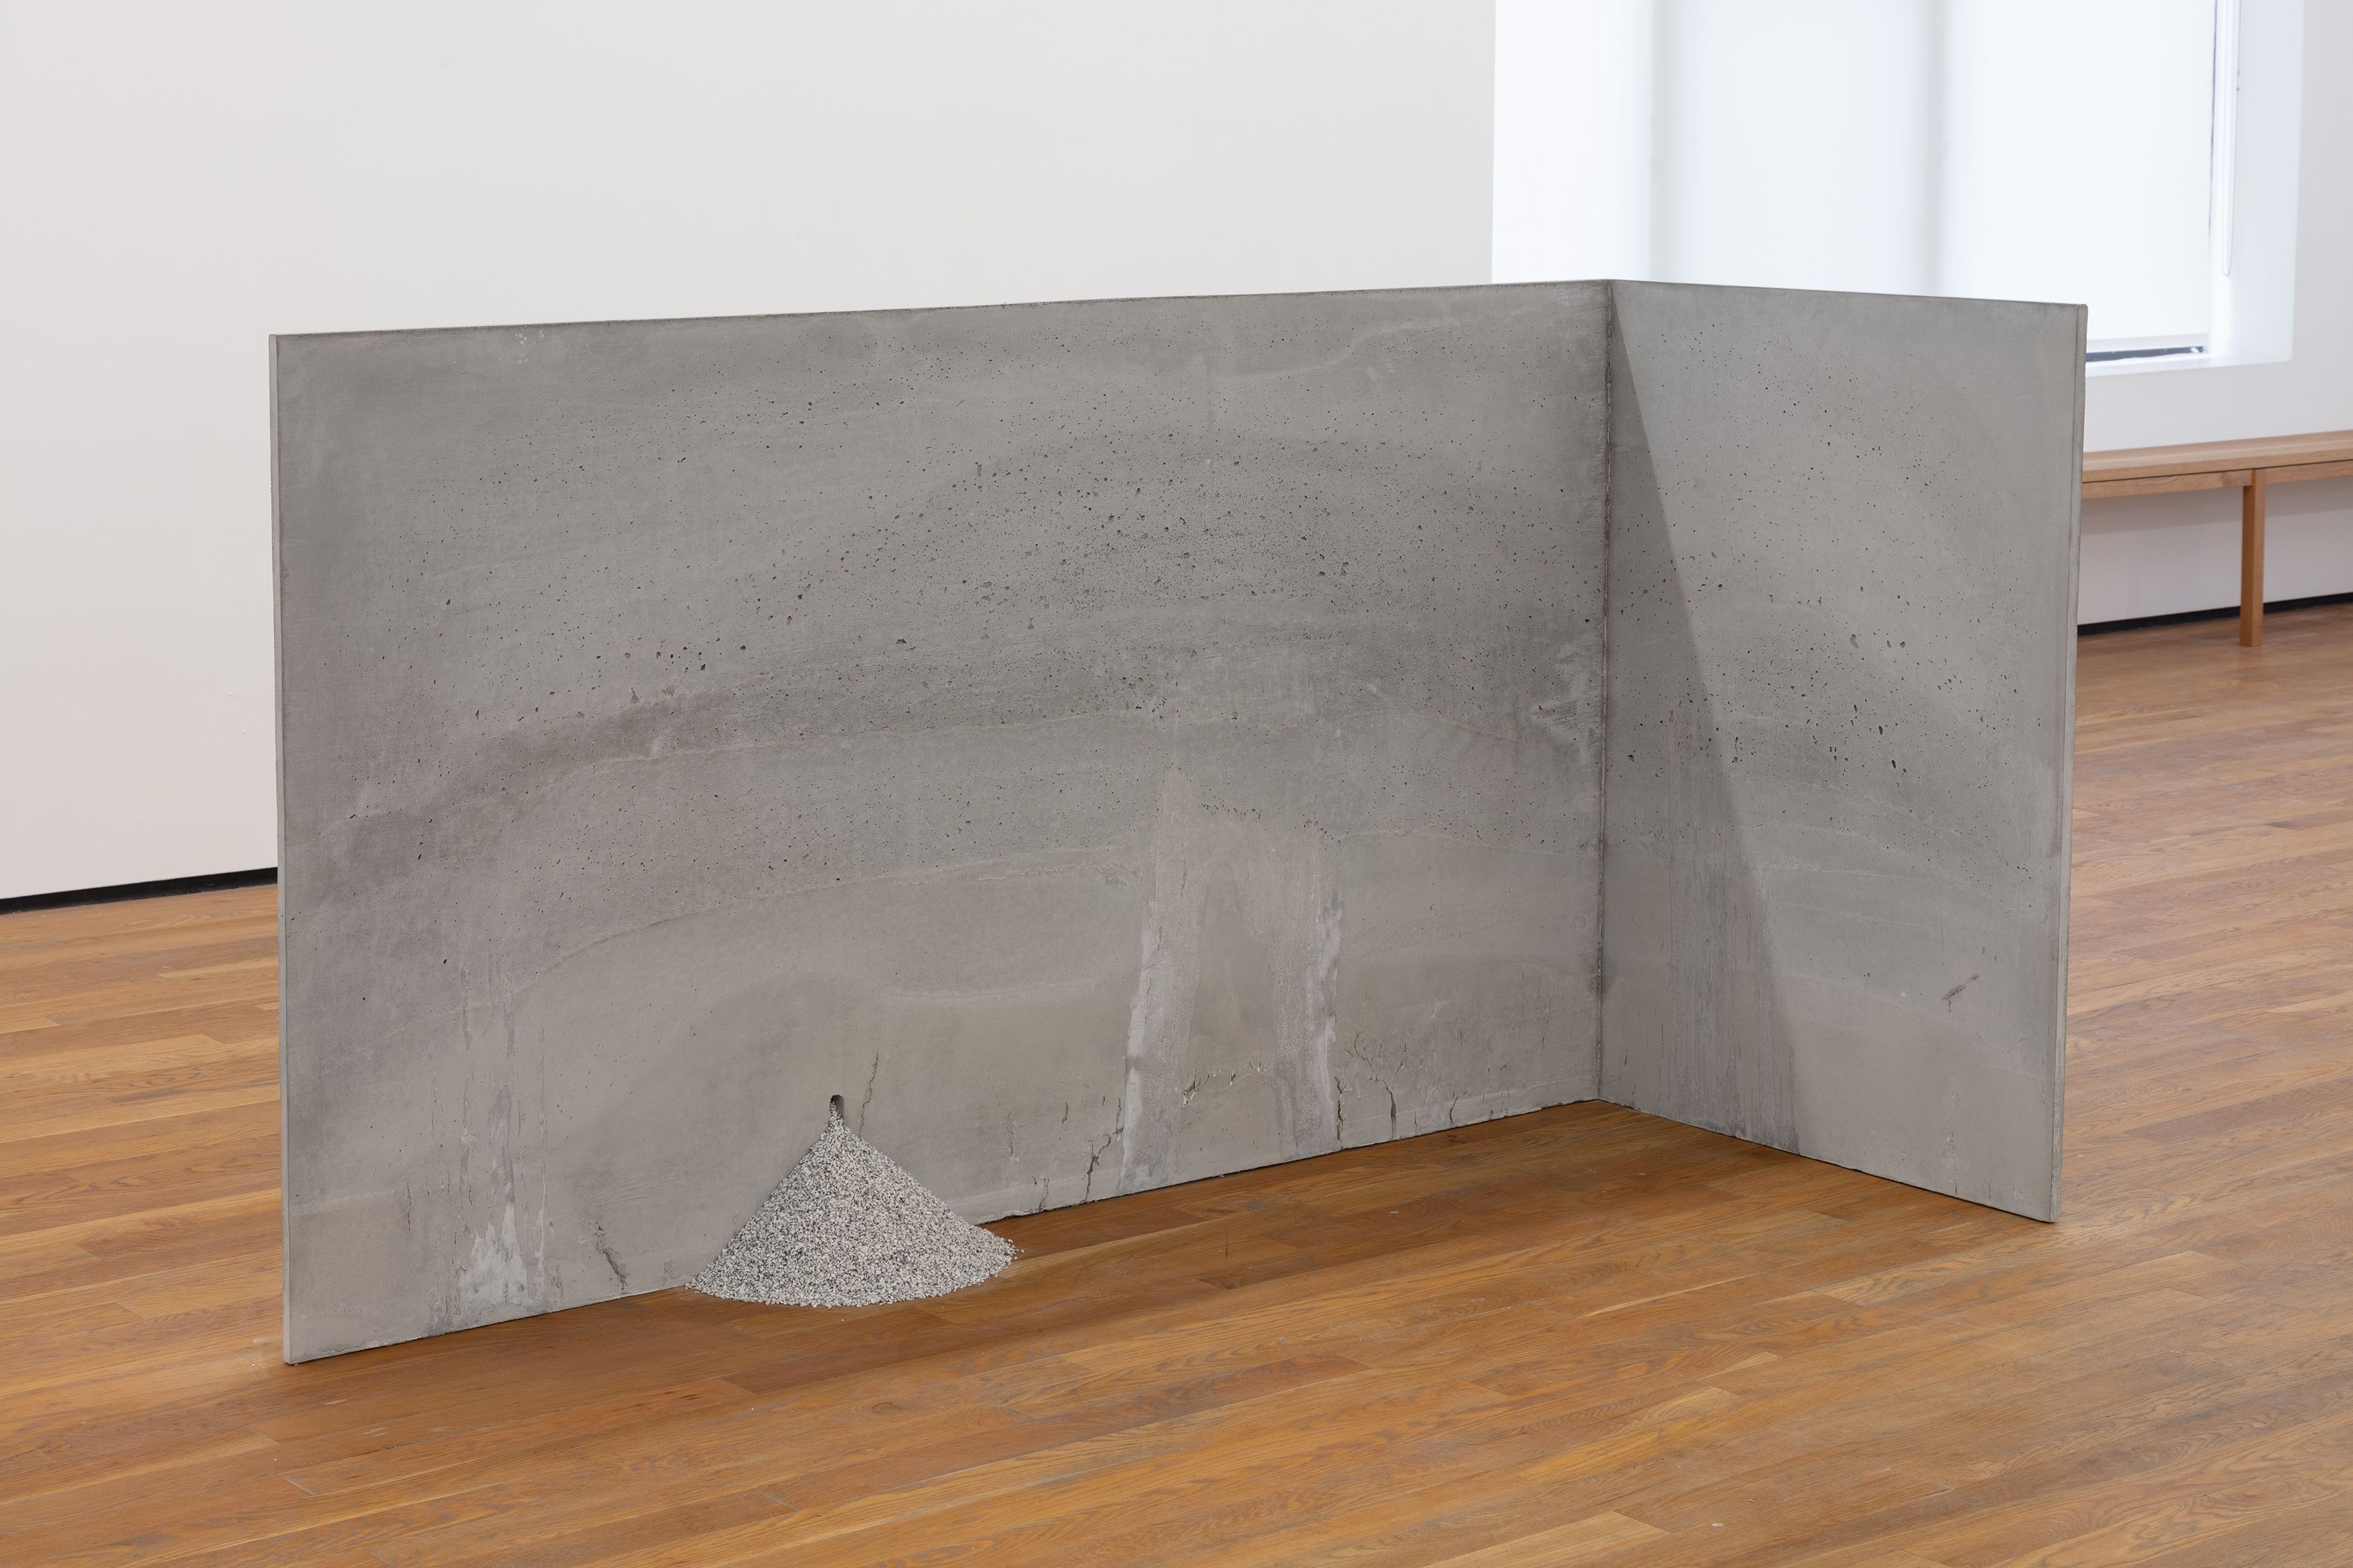 Stephen Lichty, Repose 1, 2021, concrete and crushed granite, 44 x 77 x 58 in. (111.76 x 195.58 x 147.32 cm)